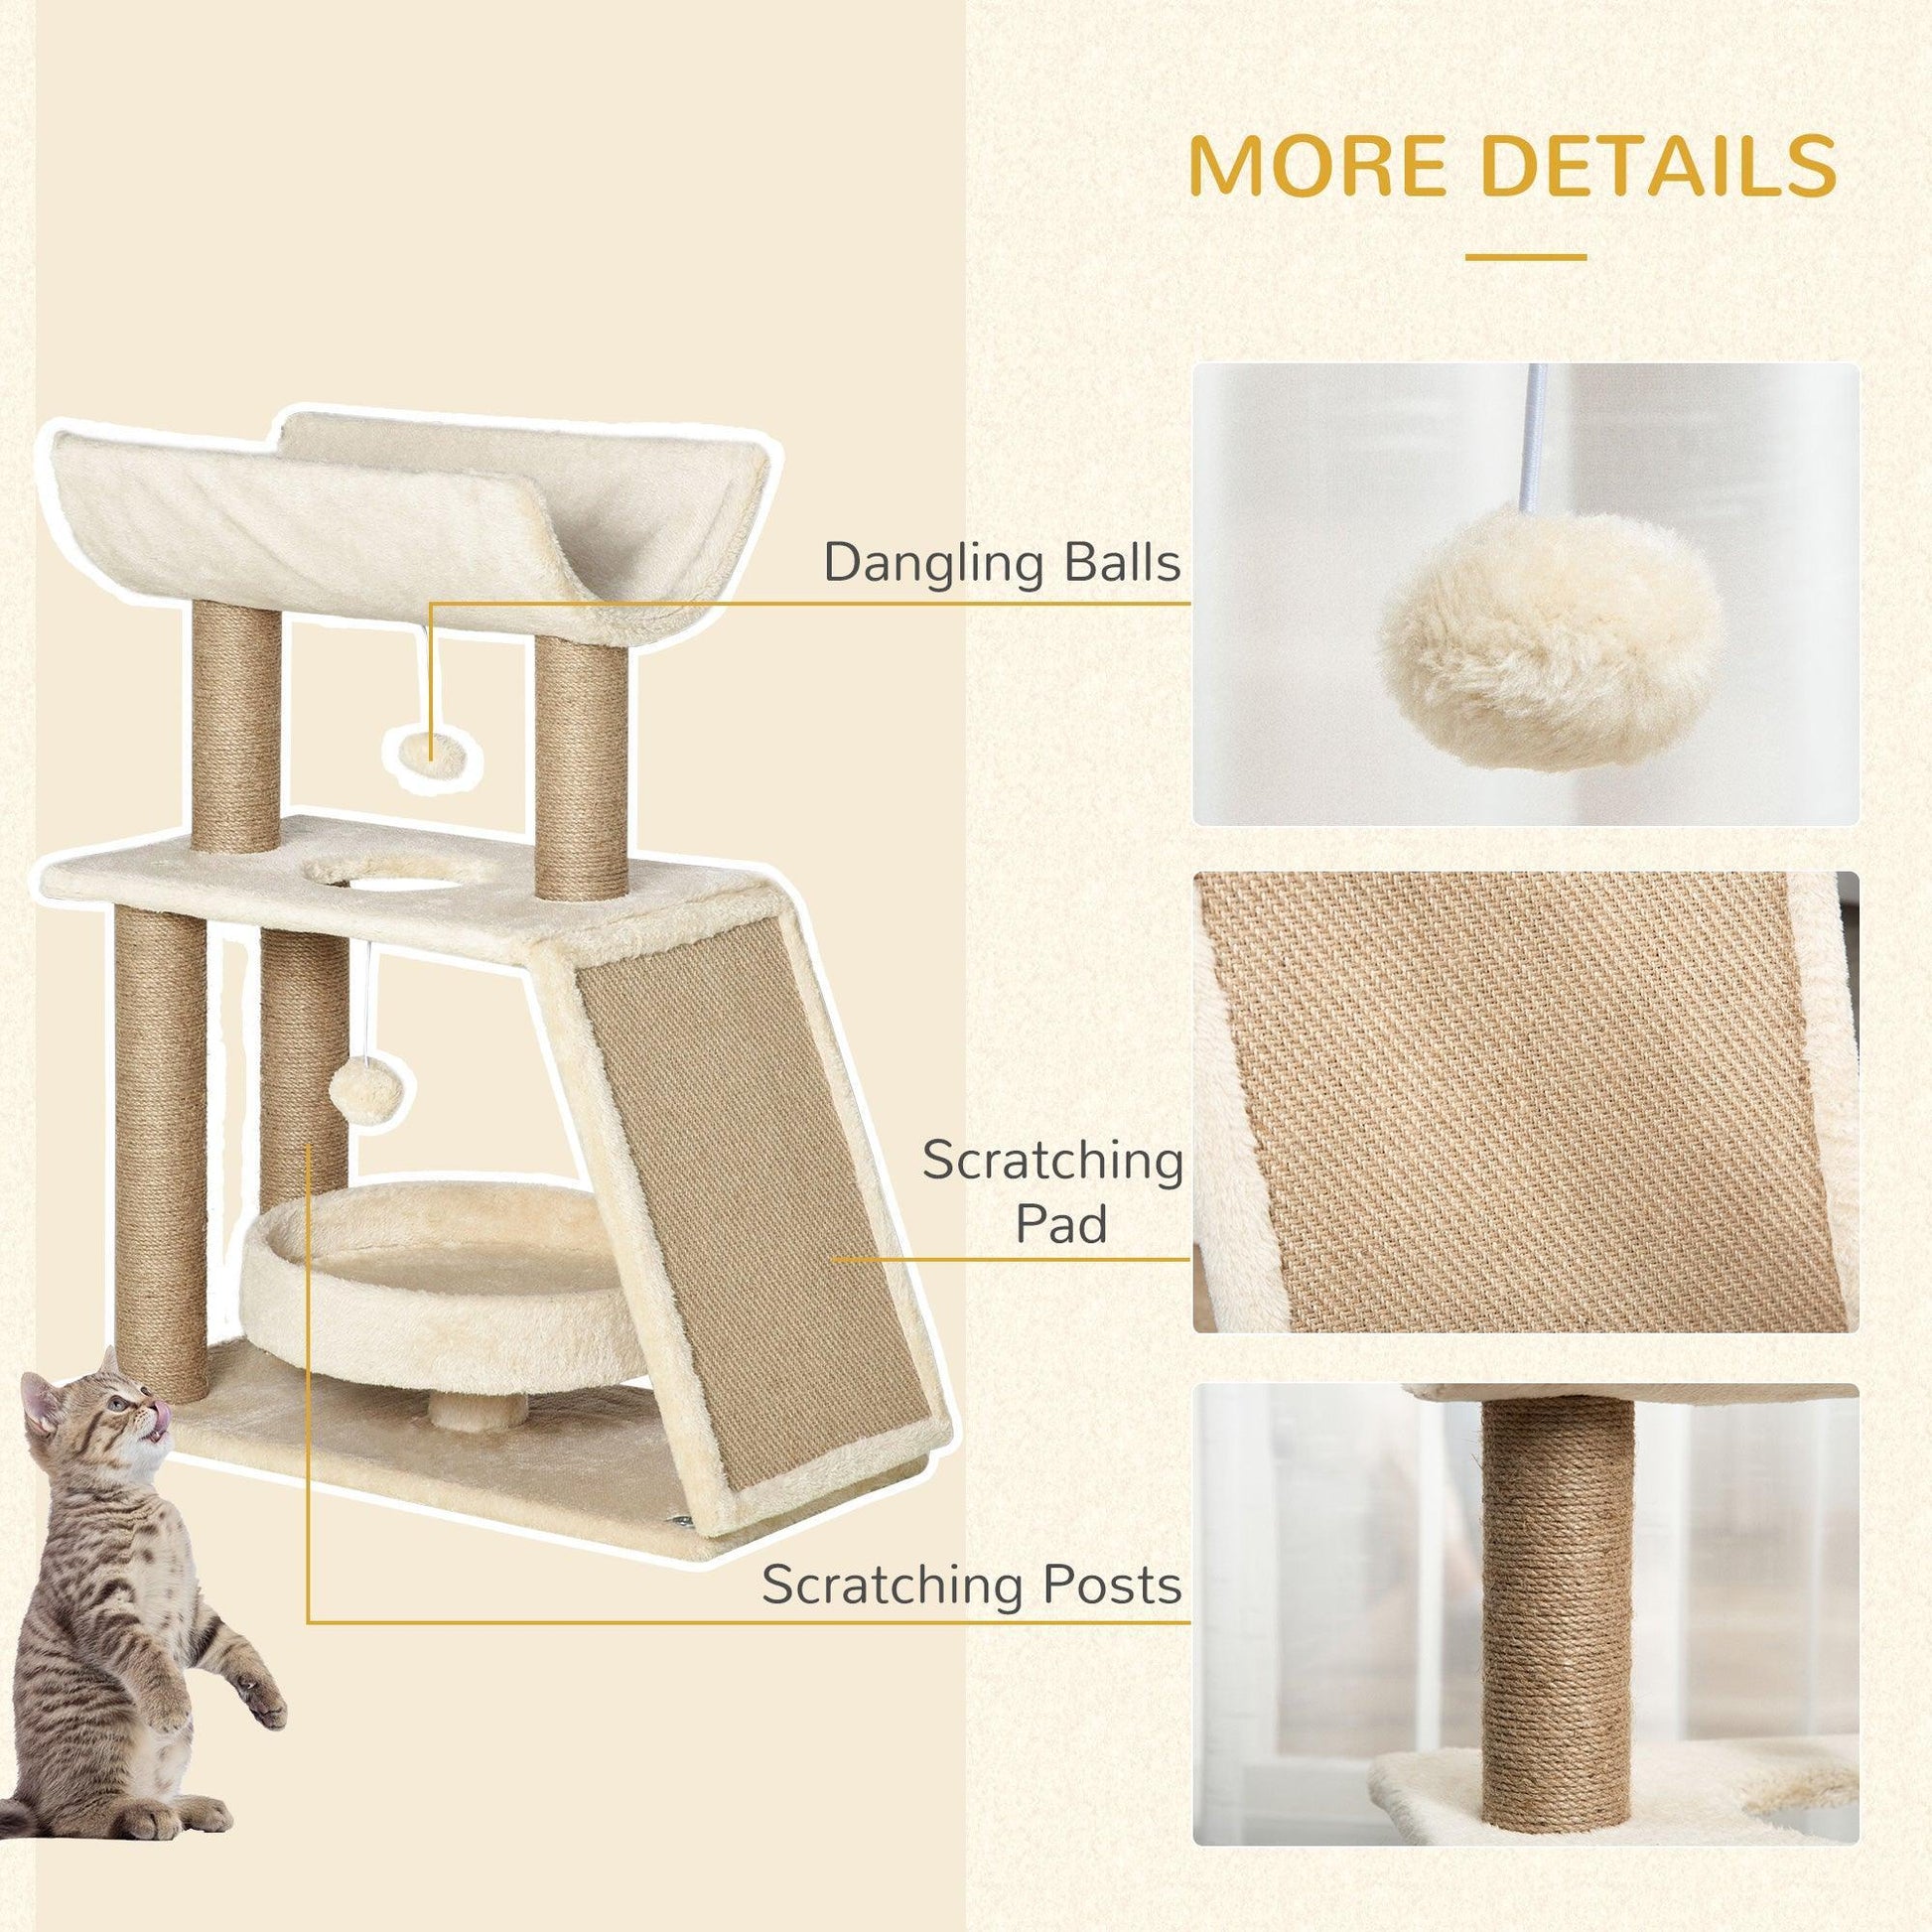 PawHut Cat Tower with Scratching Posts and Toy, 60x30x76cm - ALL4U RETAILER LTD